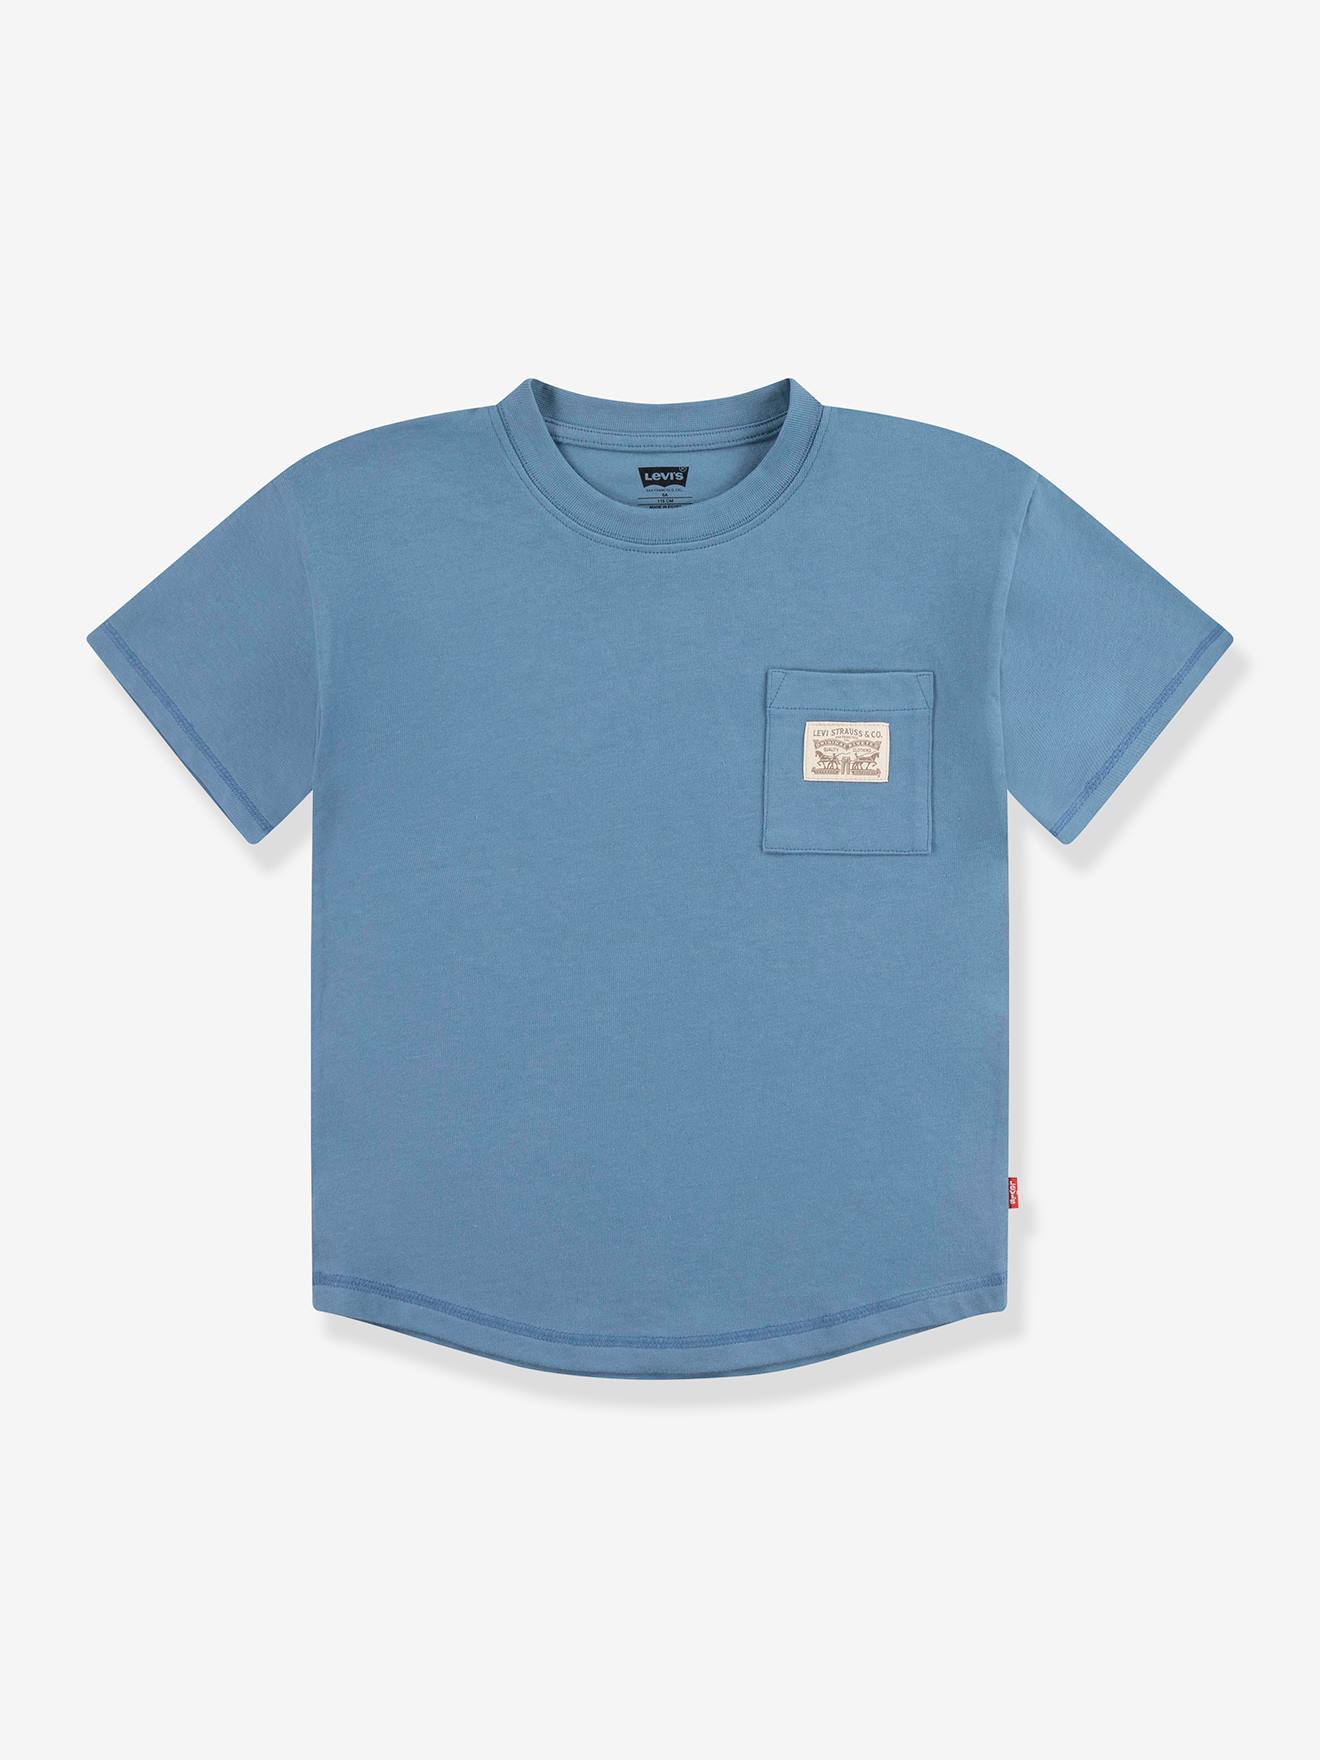 T-Shirt with Pocket by Levi’s(r) for Boys grey blue